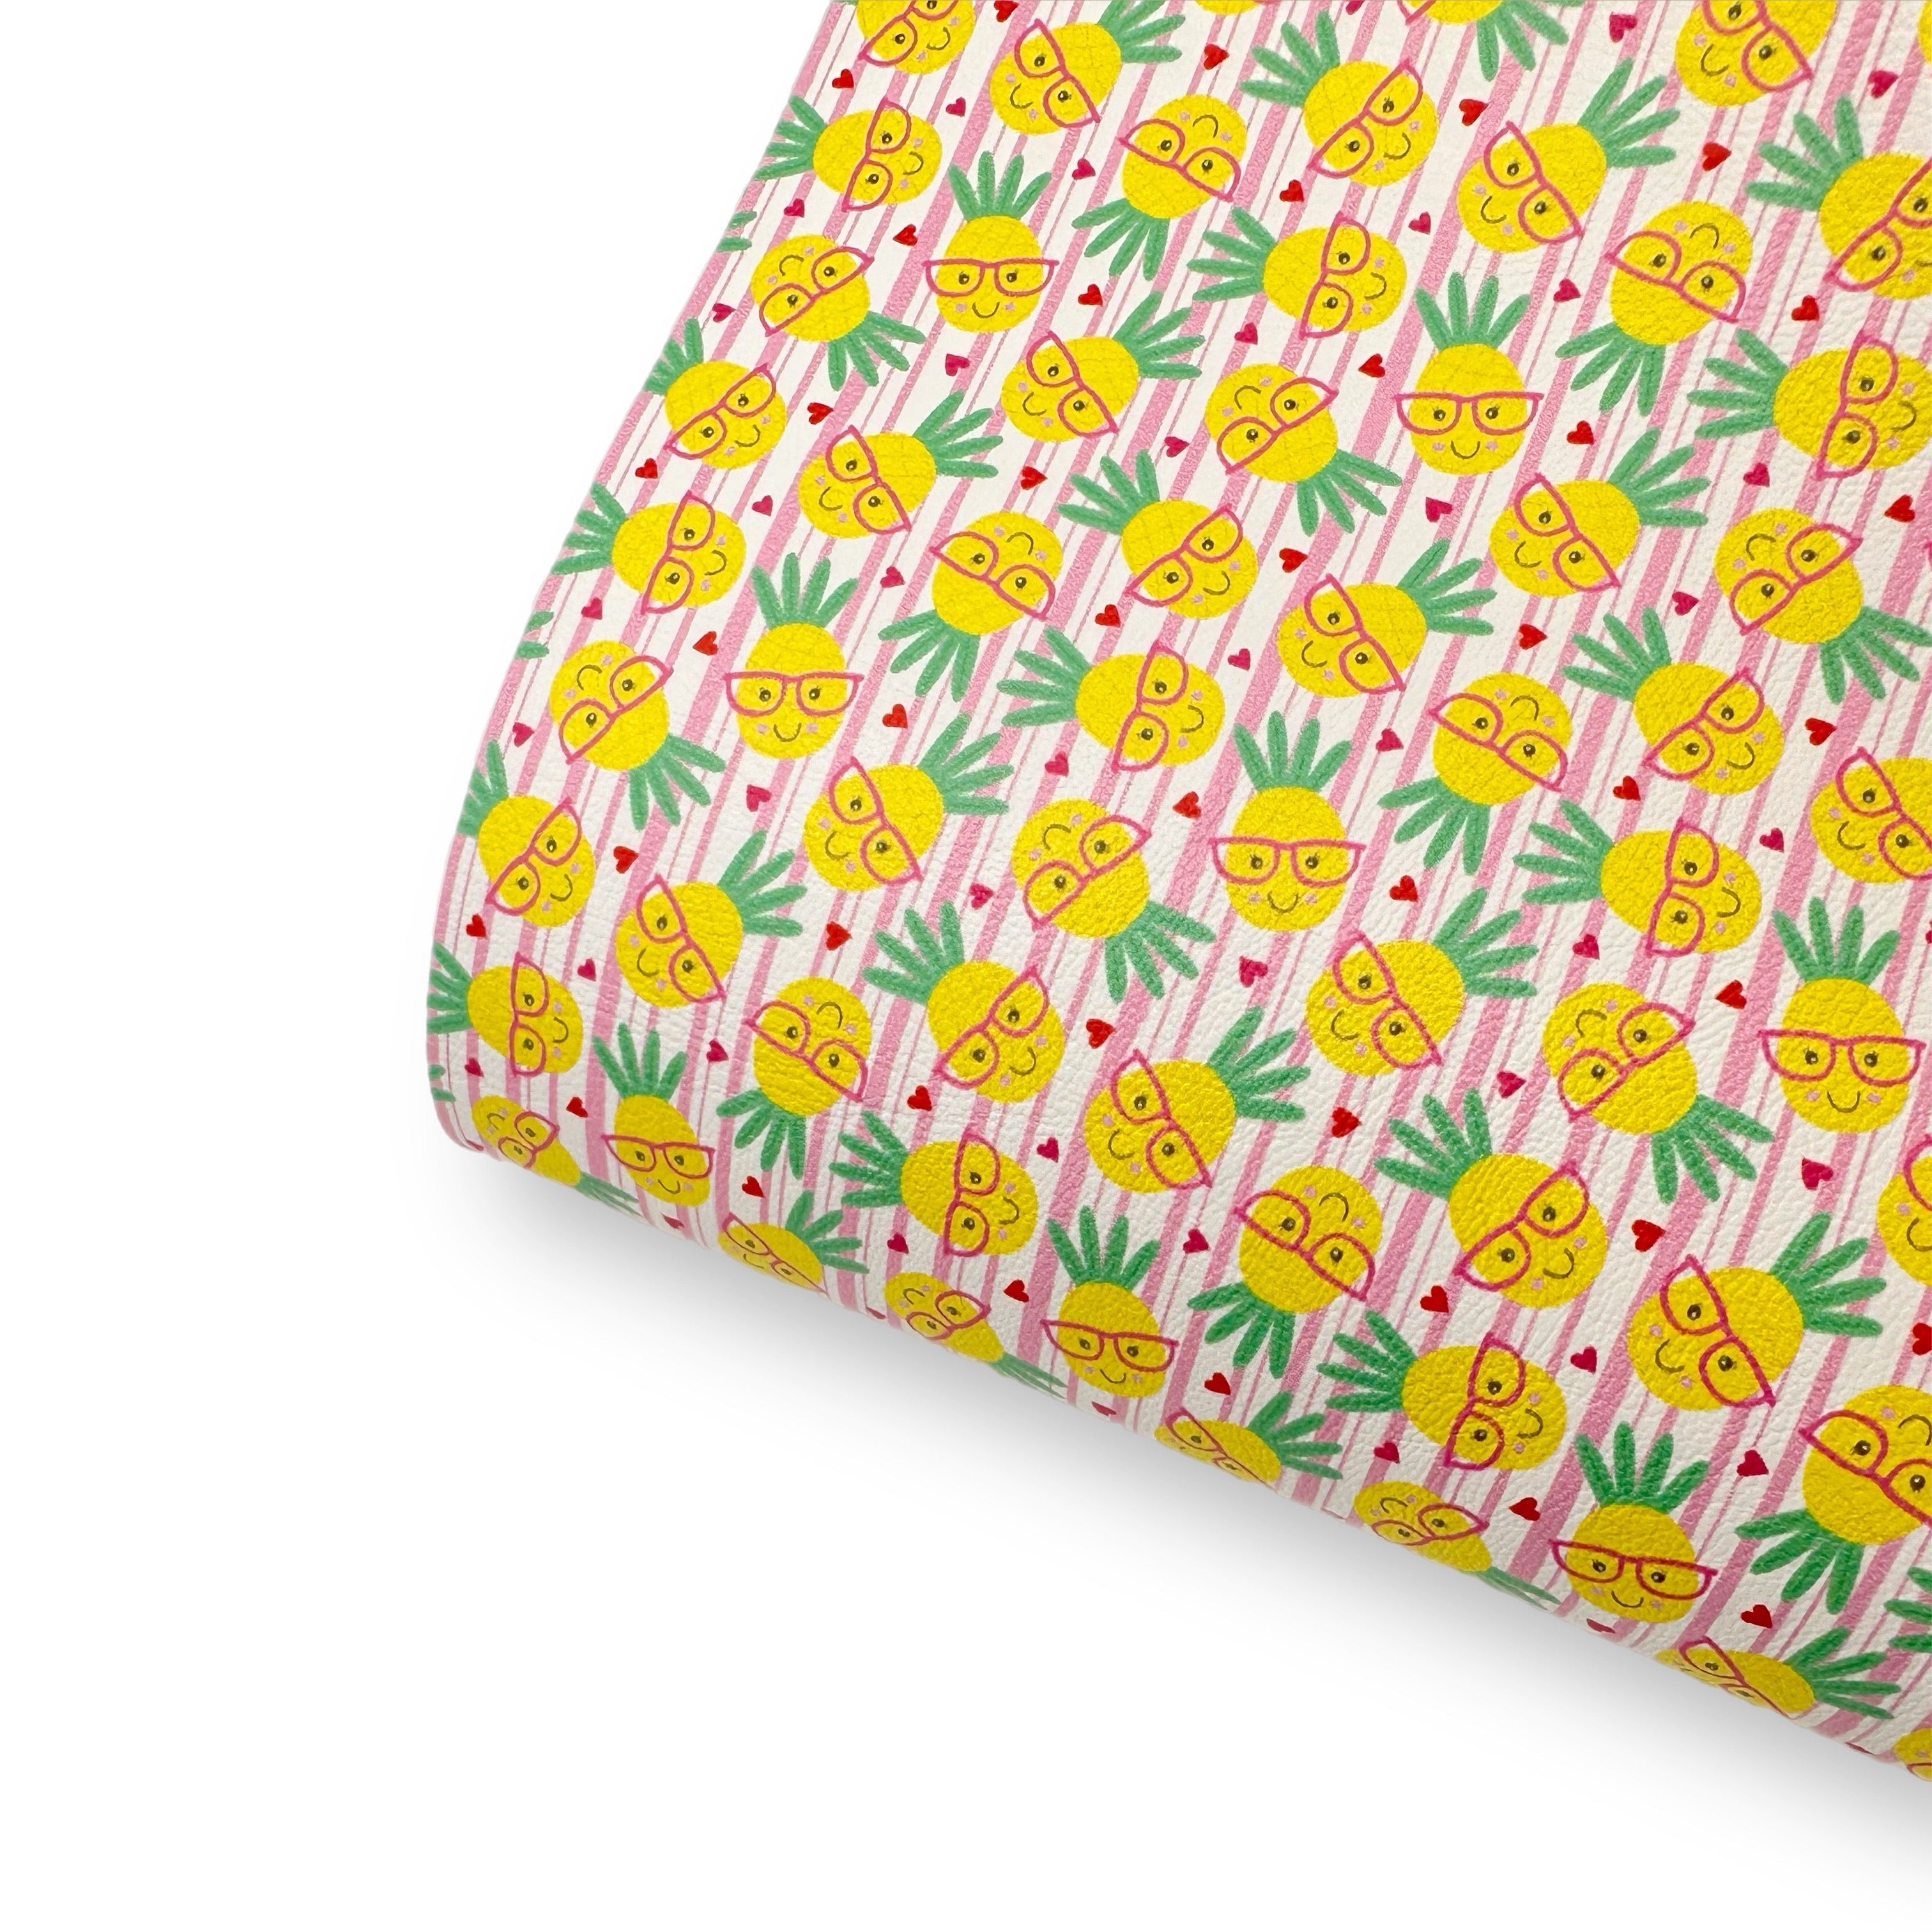 Pineapple Gang Premium Faux Leather Fabric